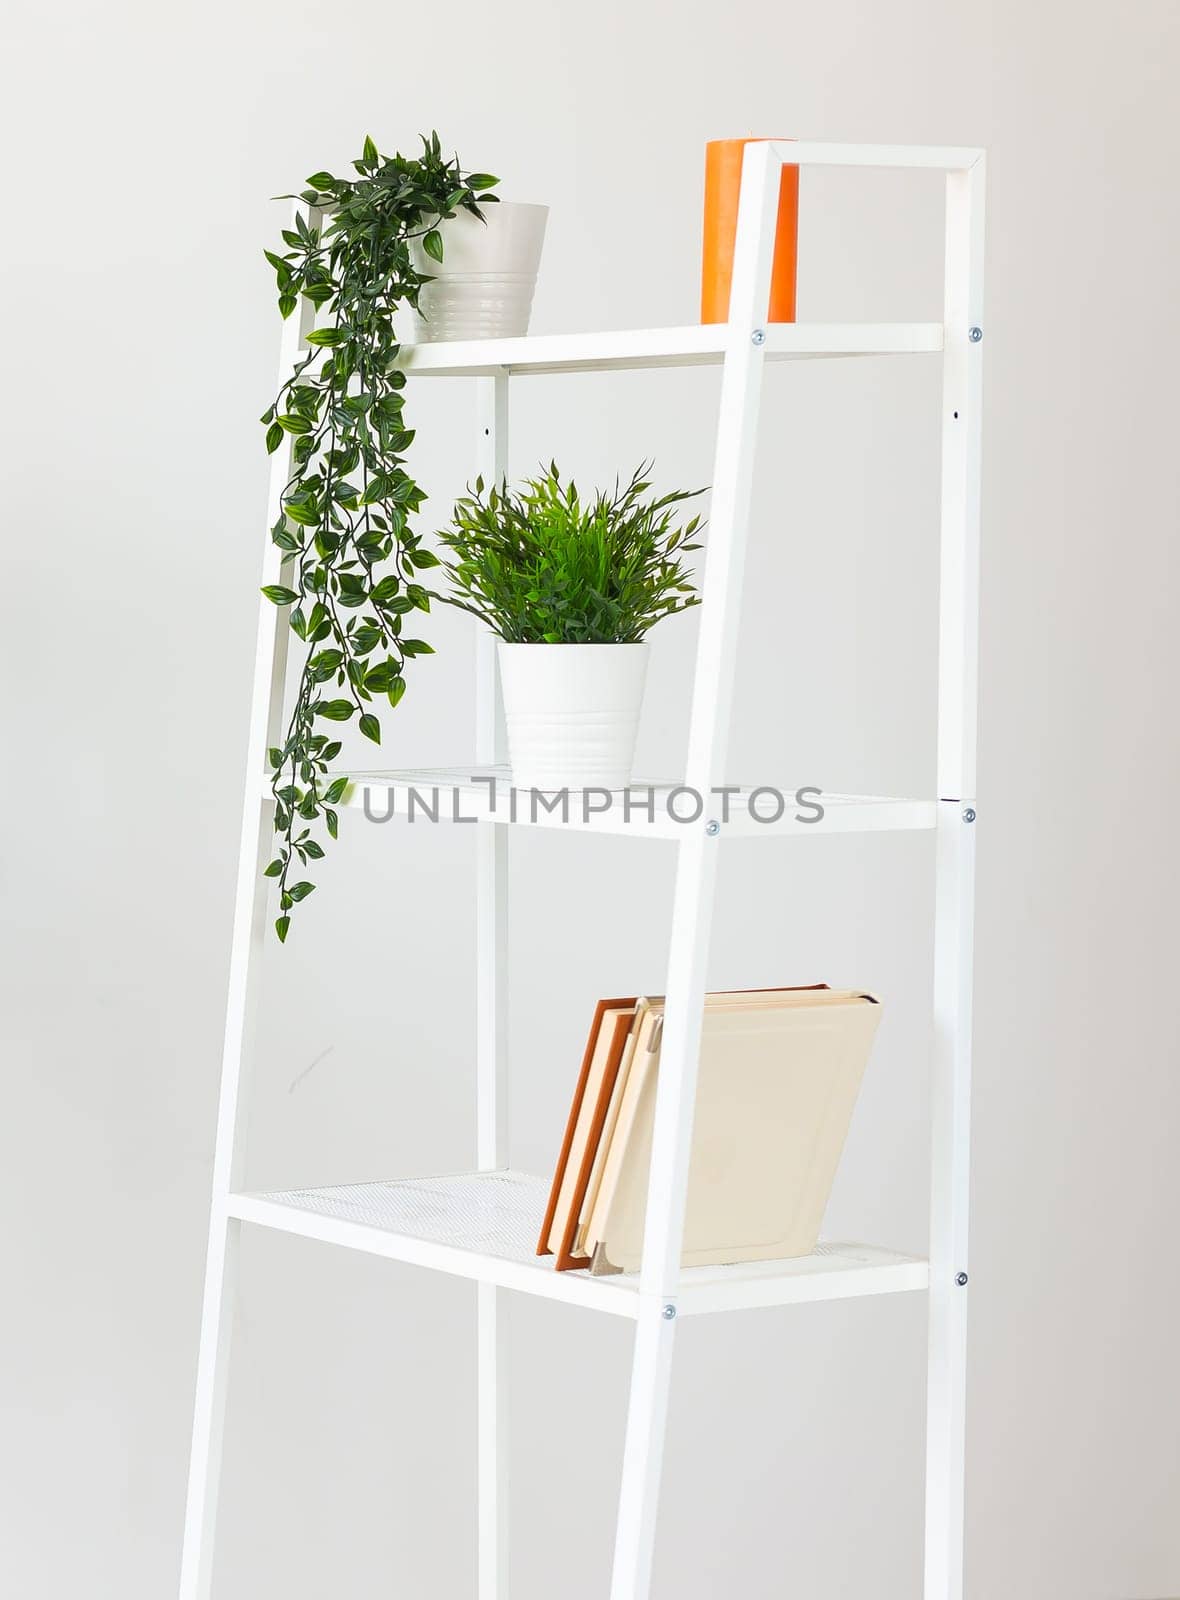 Shelf unit with books and decor artificial plant near white wall in room by Satura86